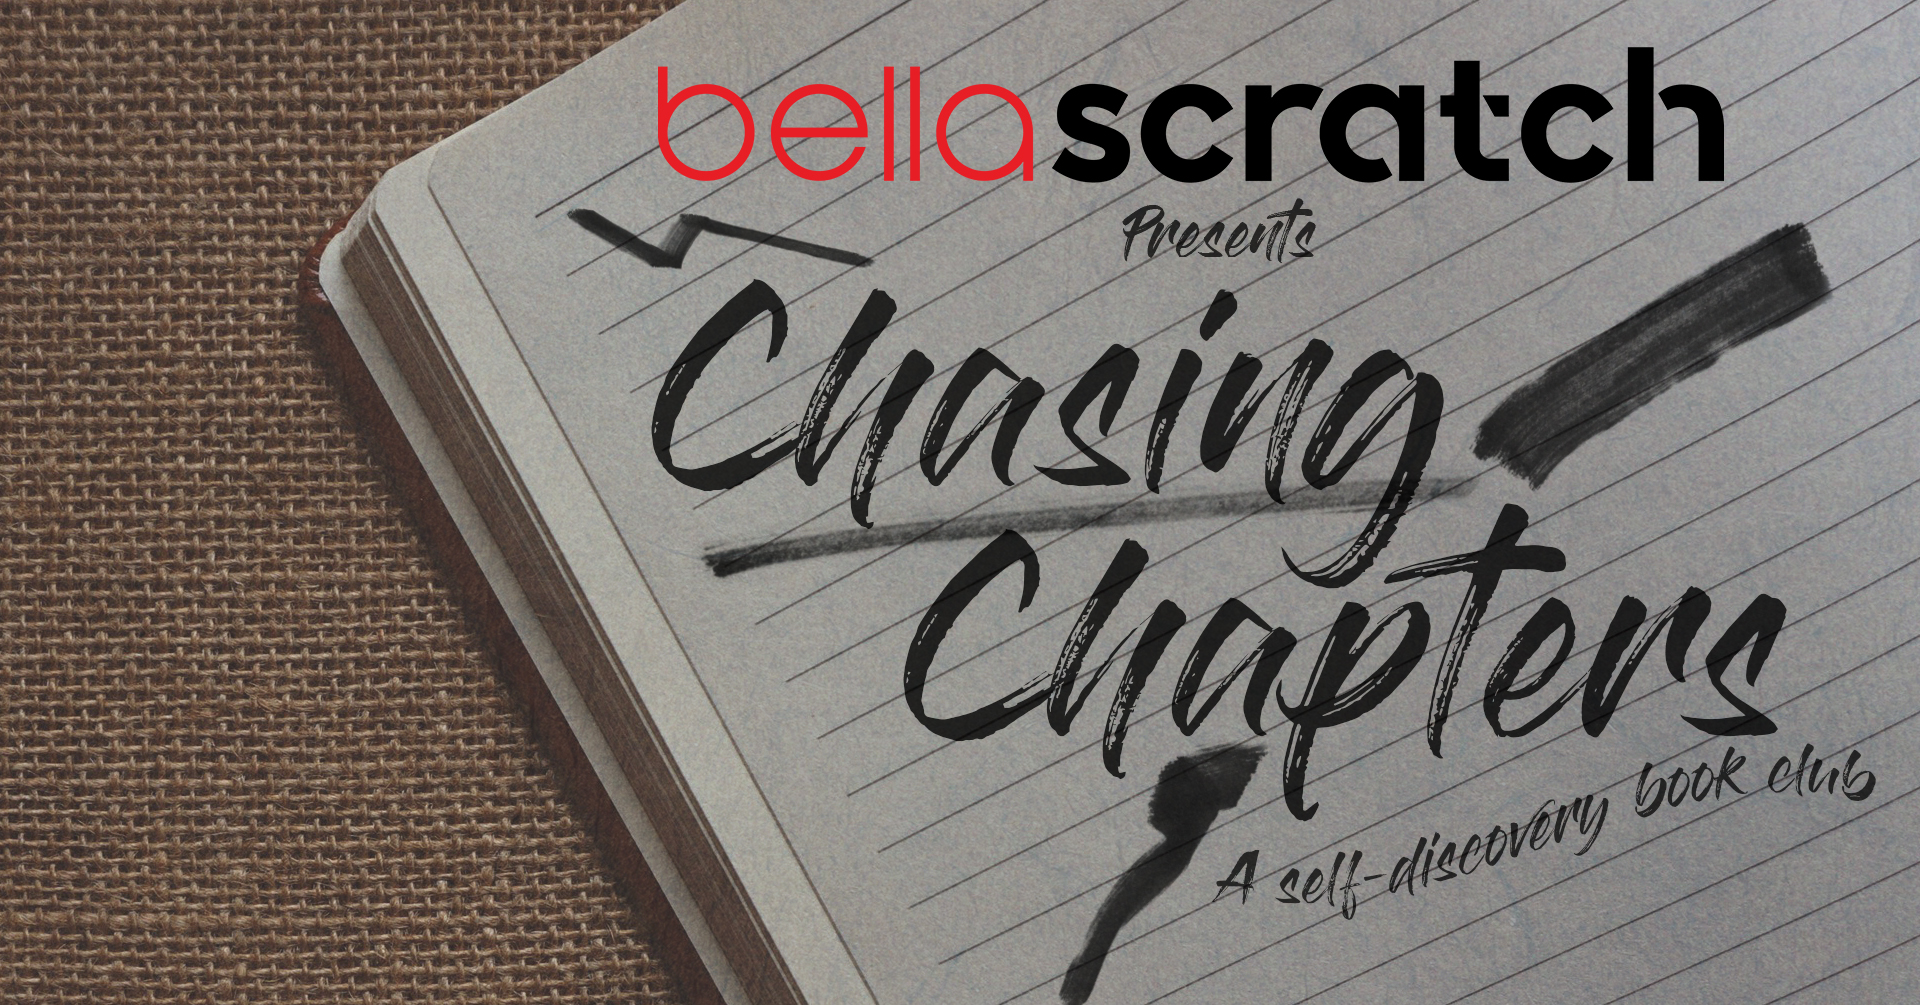 Chasing Chapters: A Self-Discovery Book Club